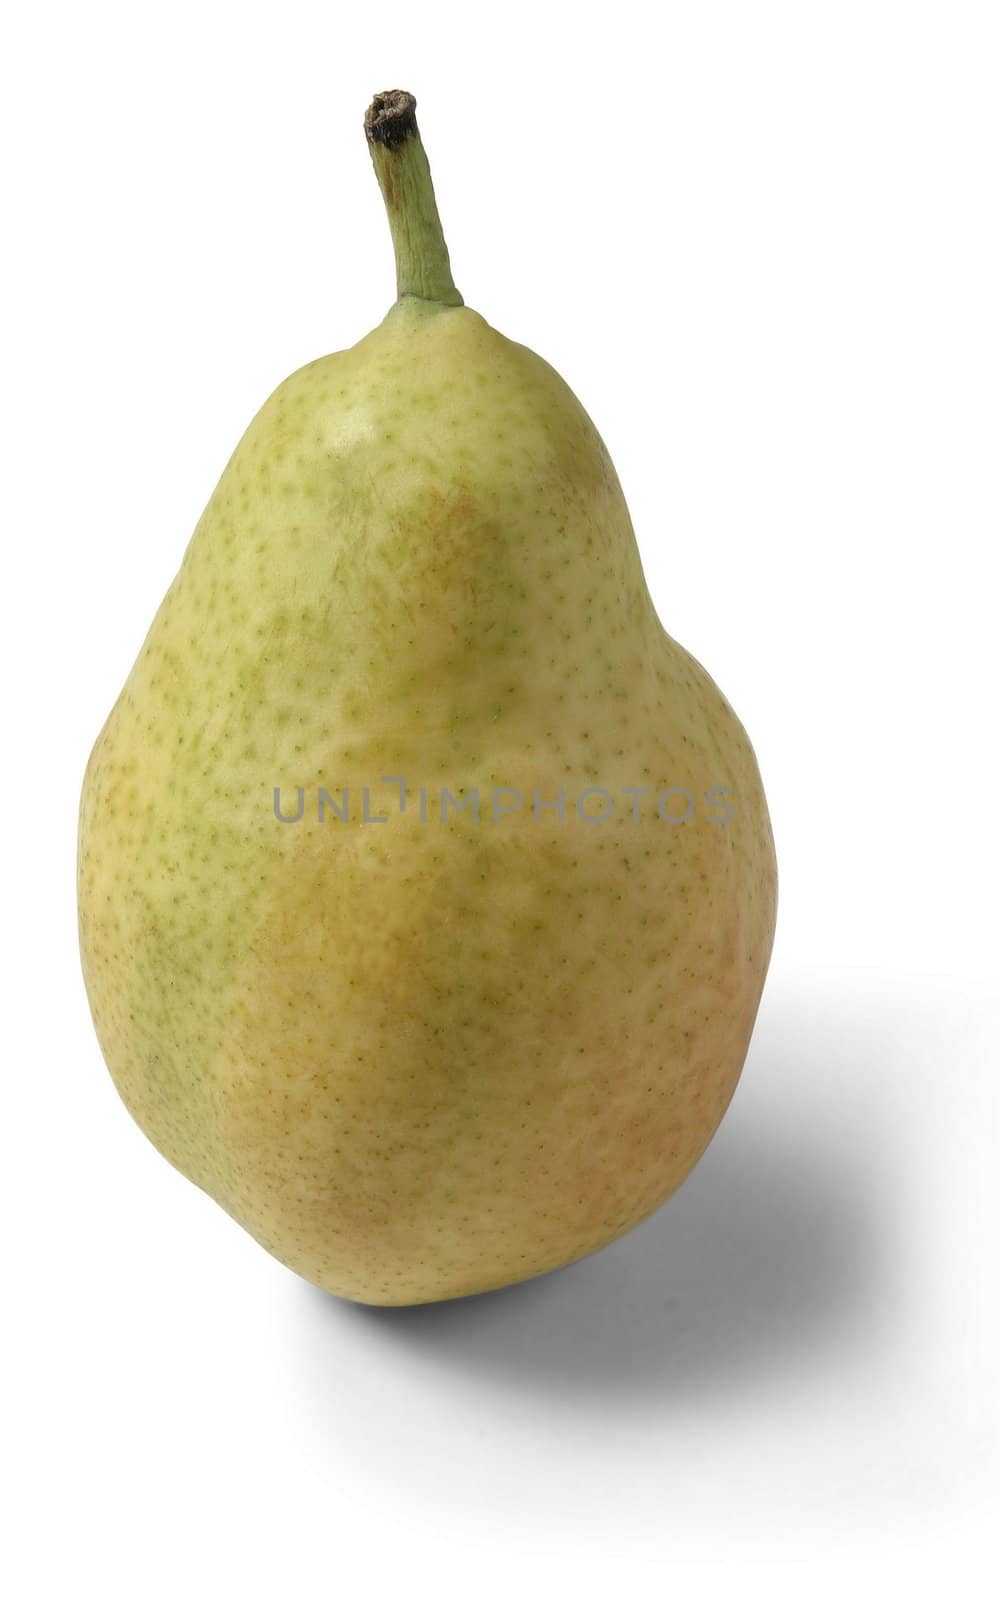 One ripe and yellow pear by Baltus